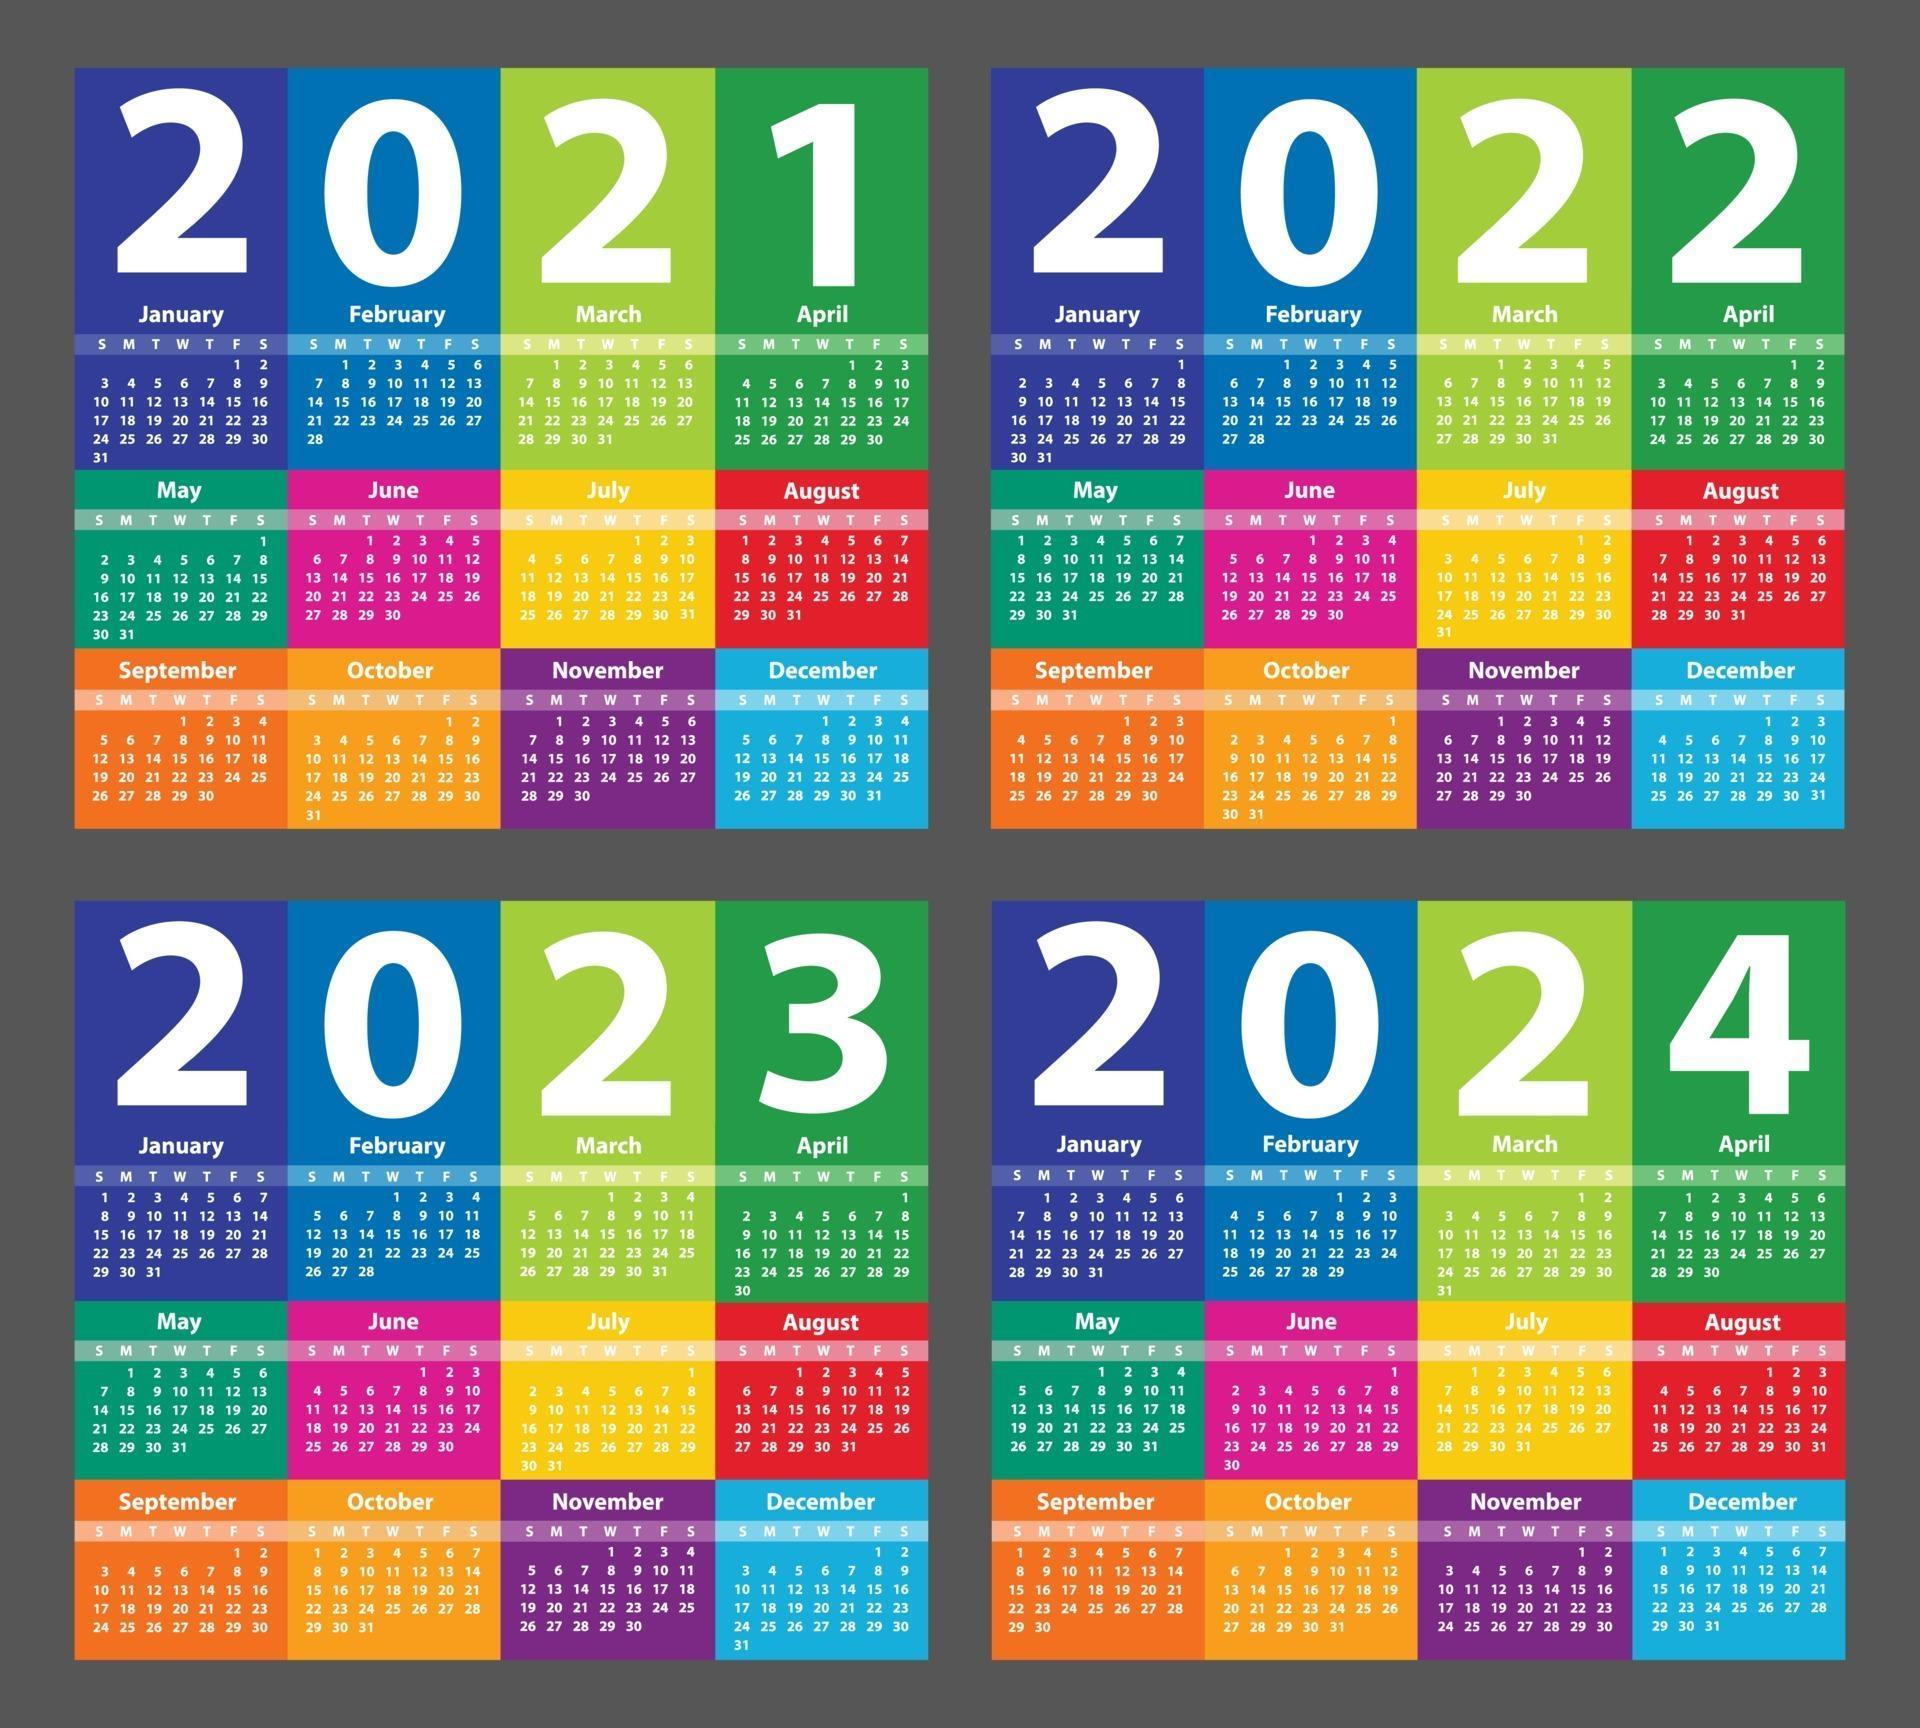 collect-2021-and-2022-and-2023-calendar-printable-best-calendar-example